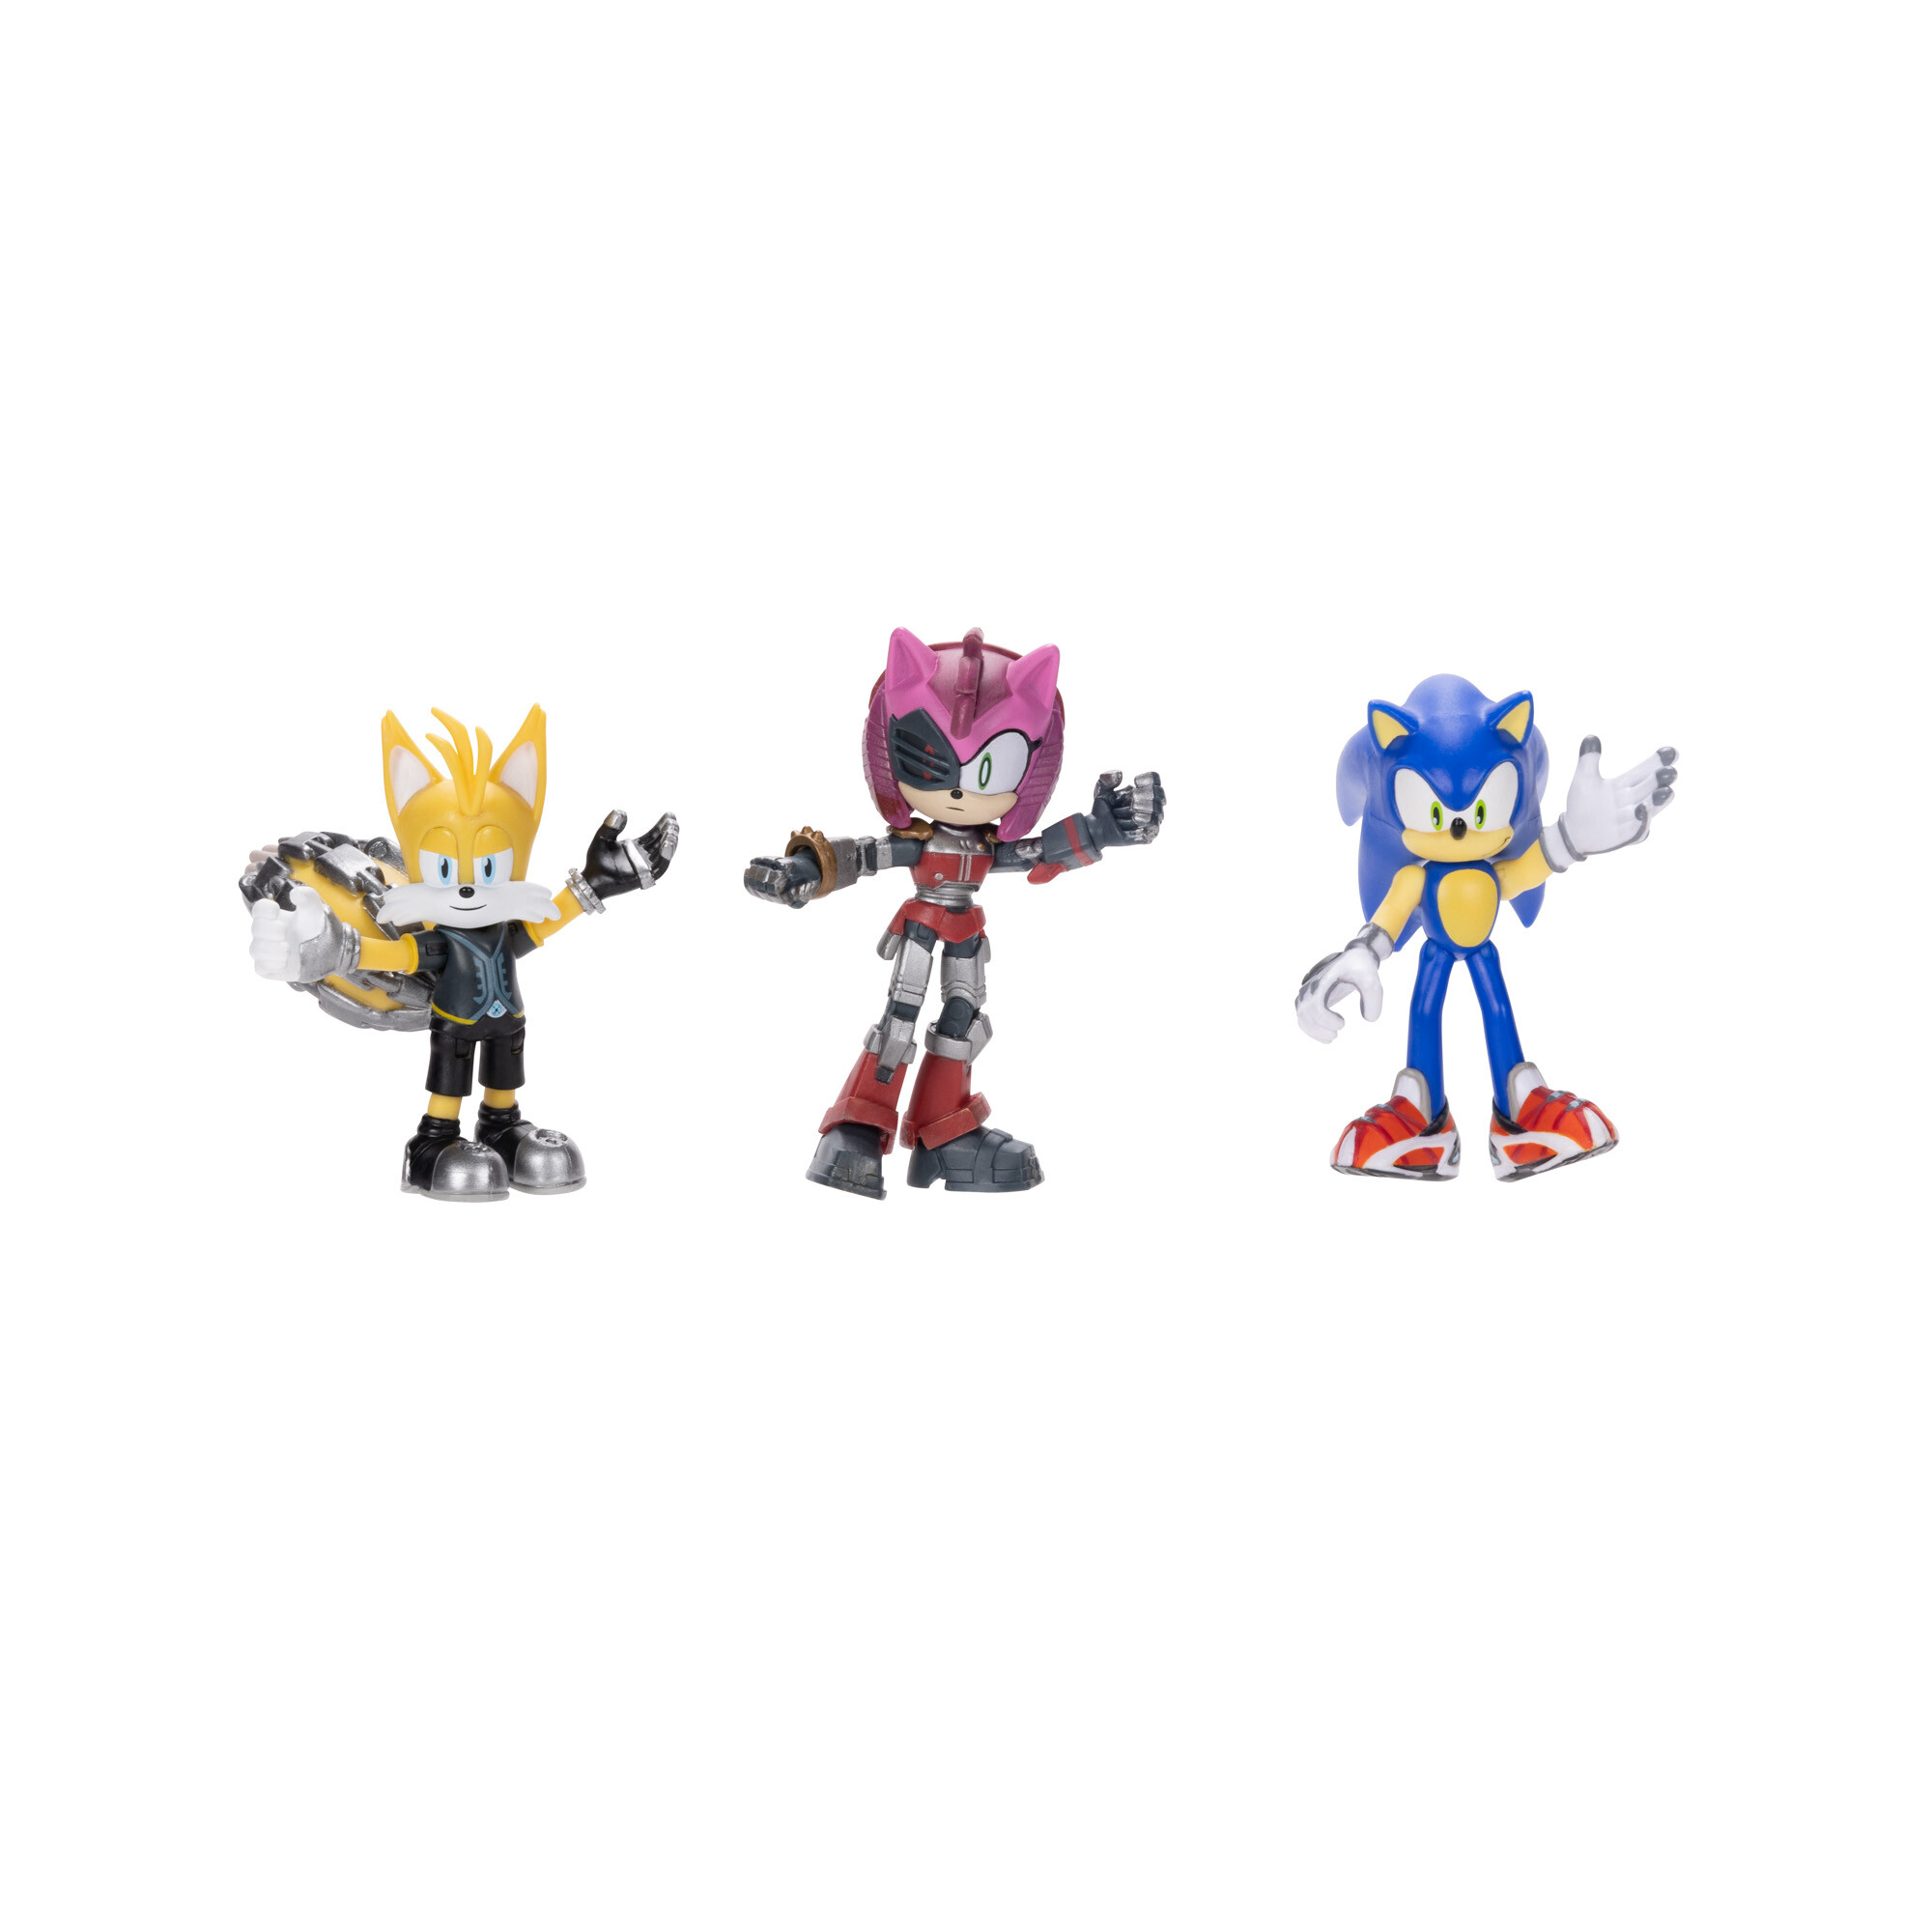 SEGA's Sonic Prime toys and costumes launch 2023.